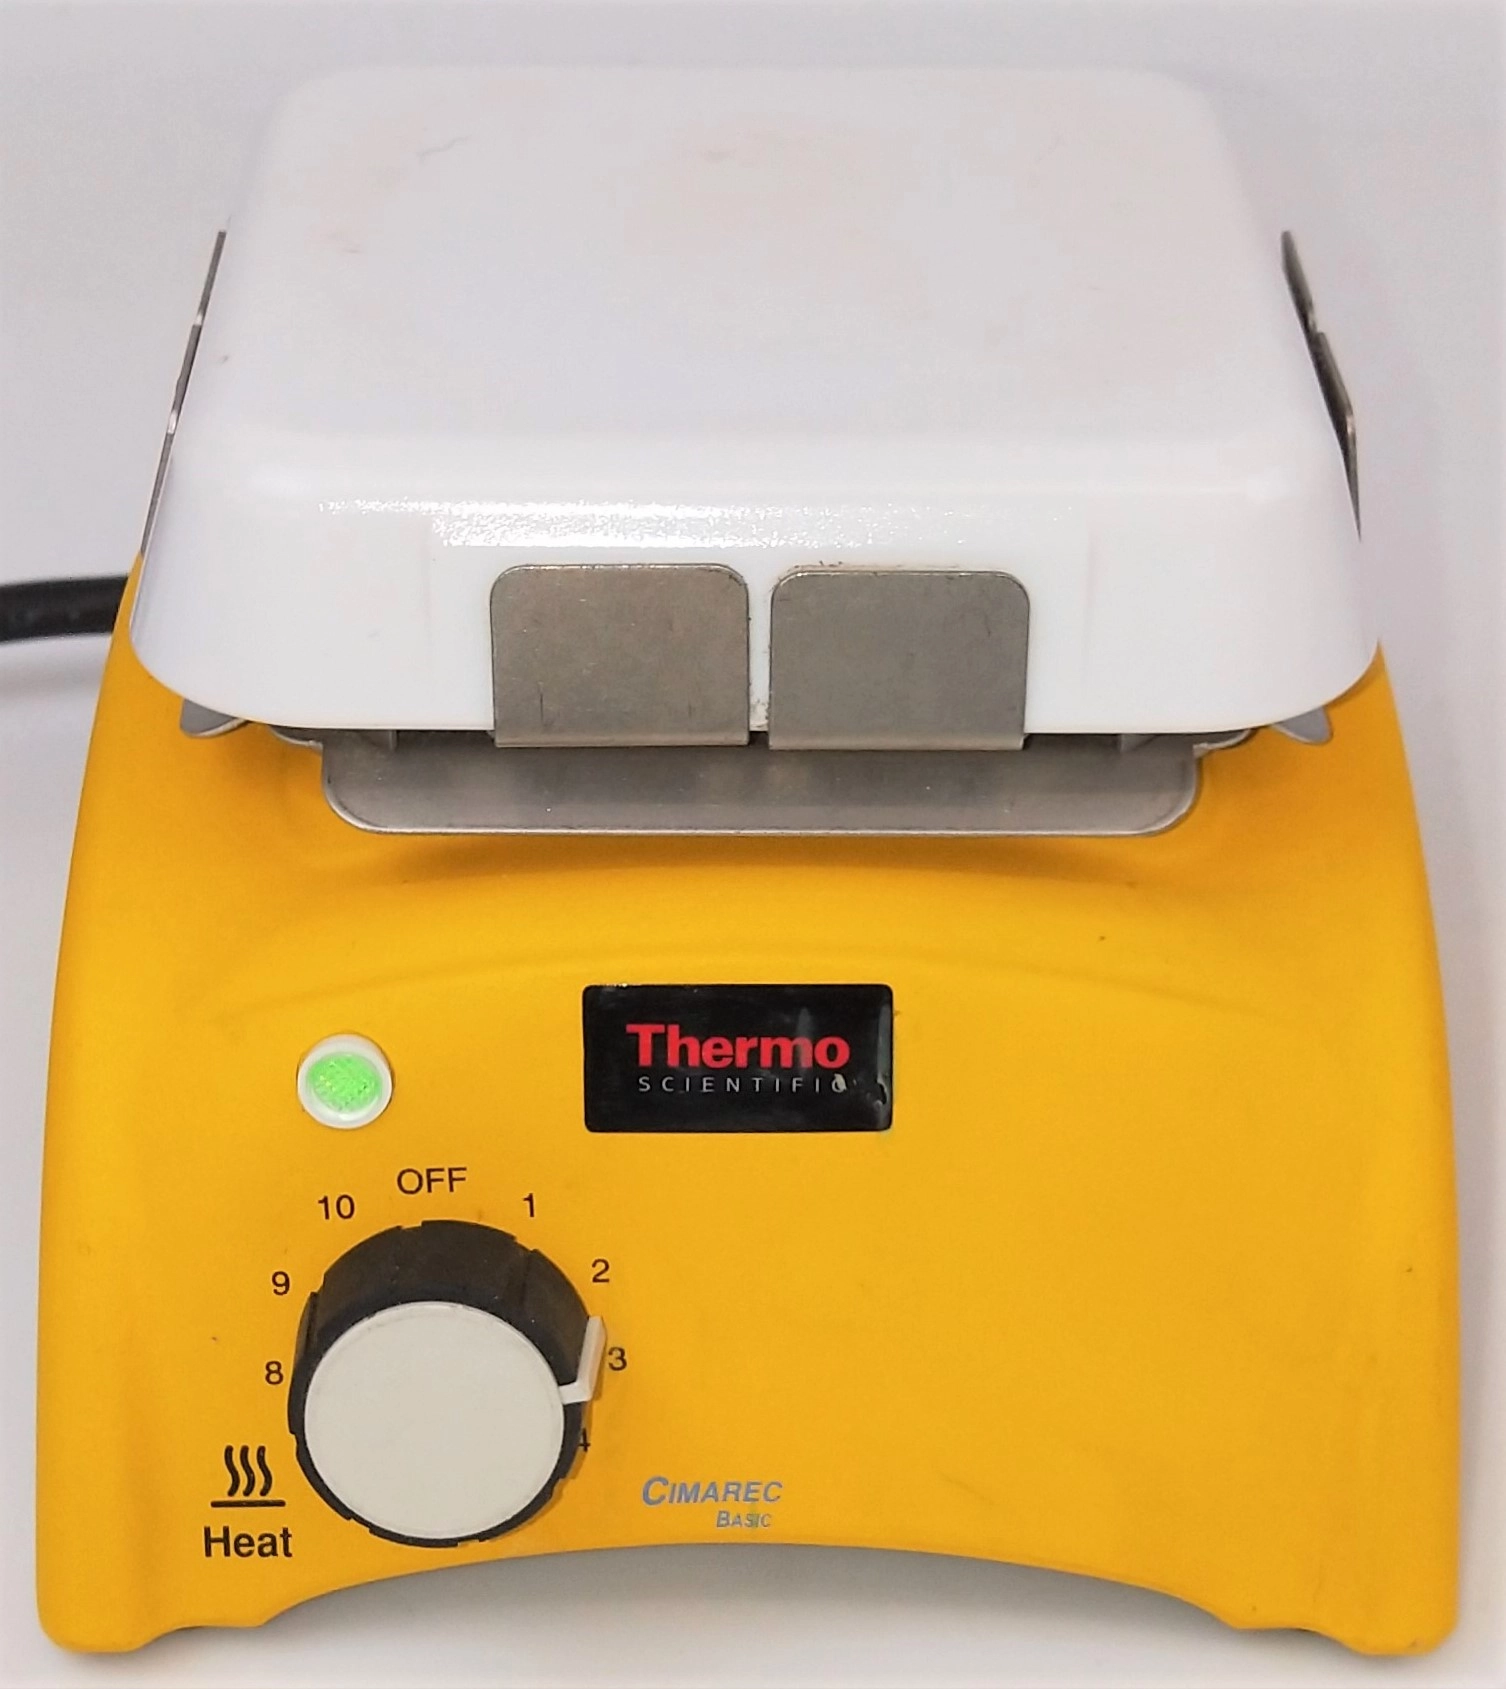 Thermo Cimarec Basic HP194515 Hot Plate - 5" x 5" Plate